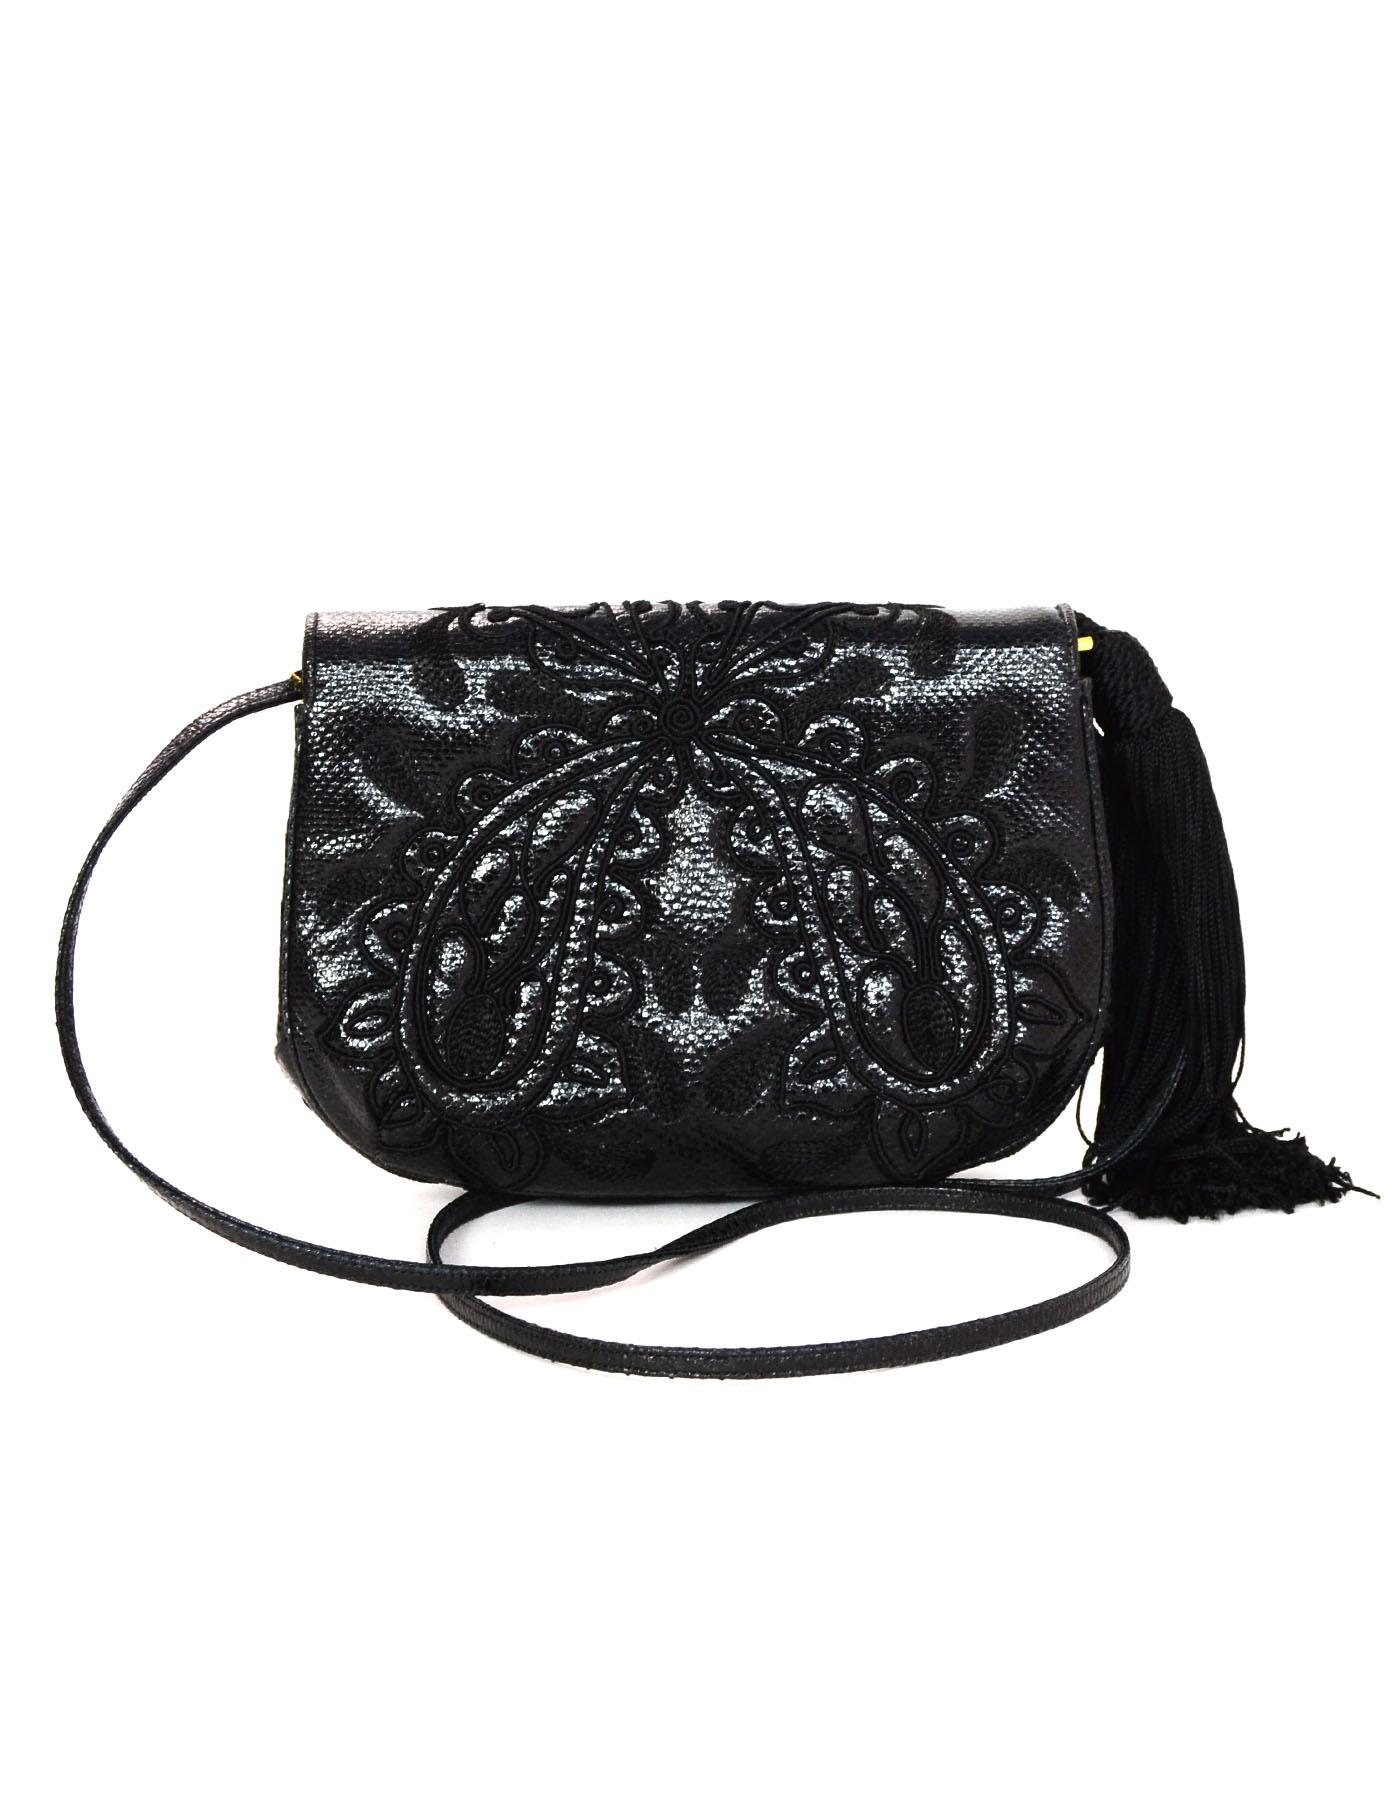 Judith Leiber Vintage Embroidered Black Lizard Bag
Featurs tassel ornament at side and optional/extra goldtone chain strap

    Color: Black
    Hardware: Goldtone
    Materials: Lizard, metal
    Lining: Black textile
    Closure/opening: Flap top